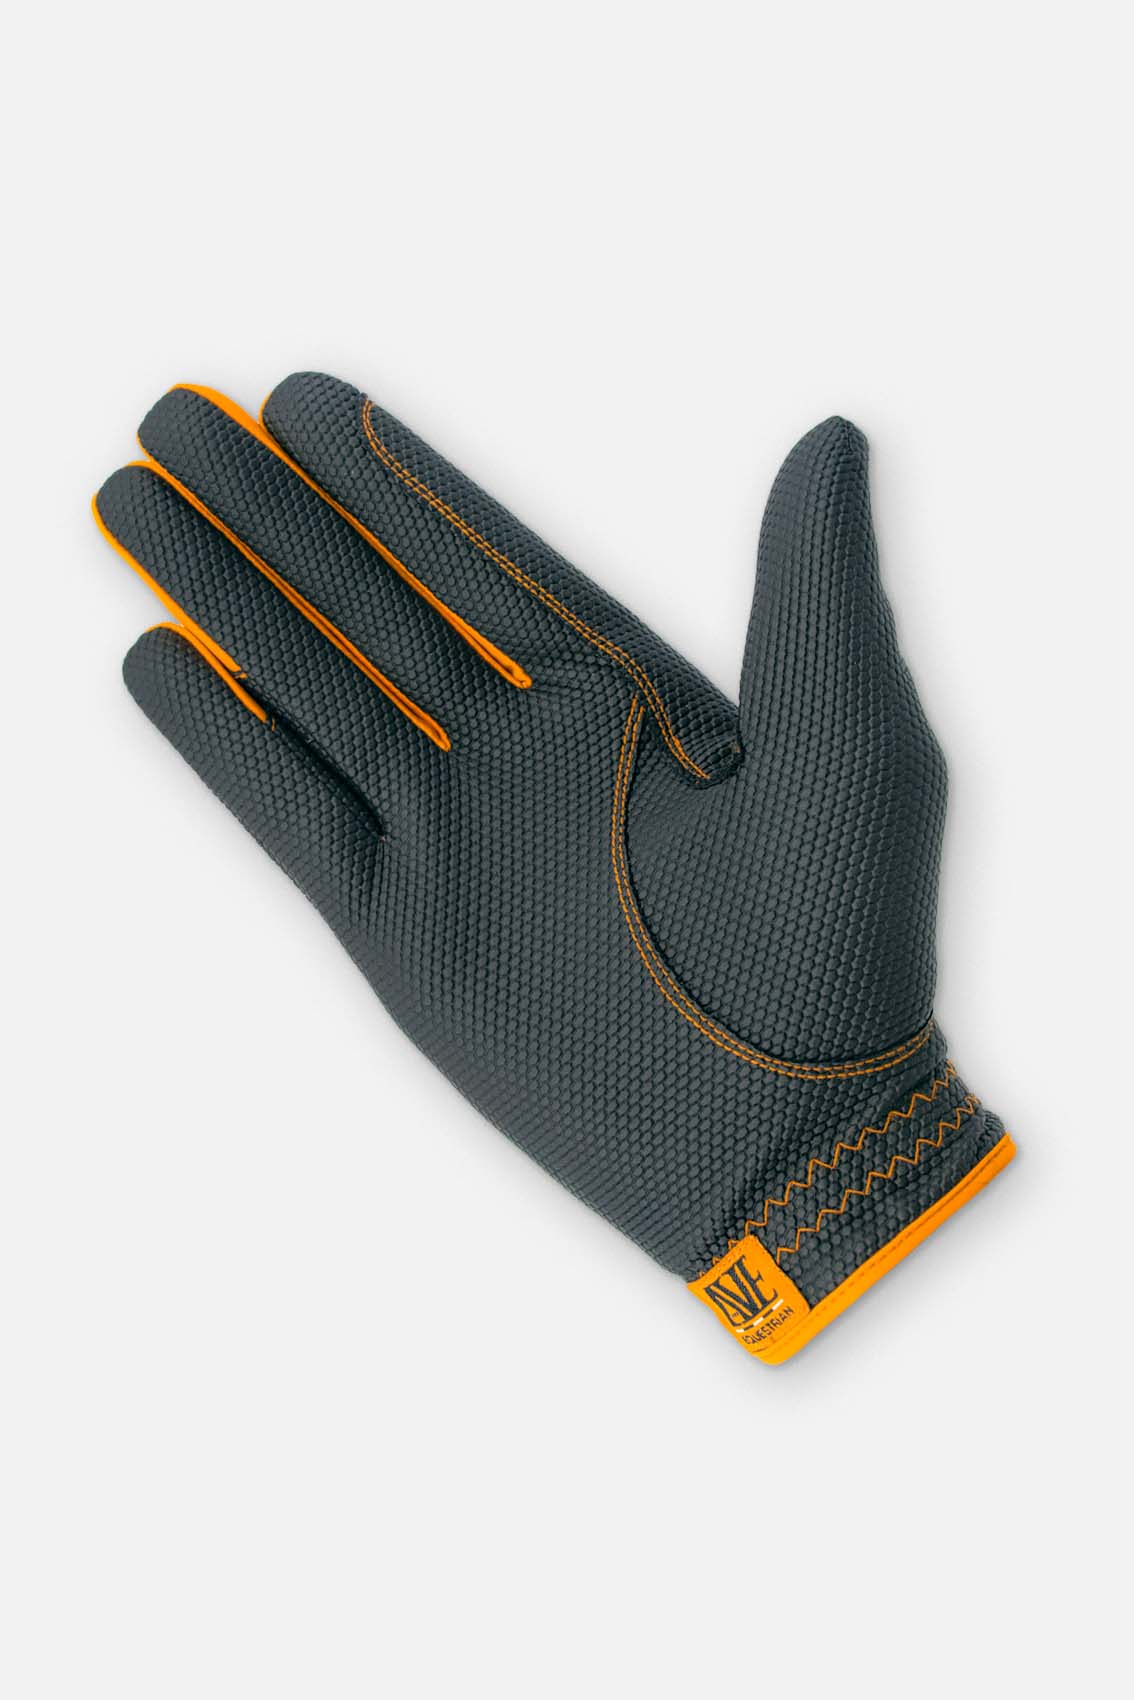 Men's riding gloves with comfort stretch